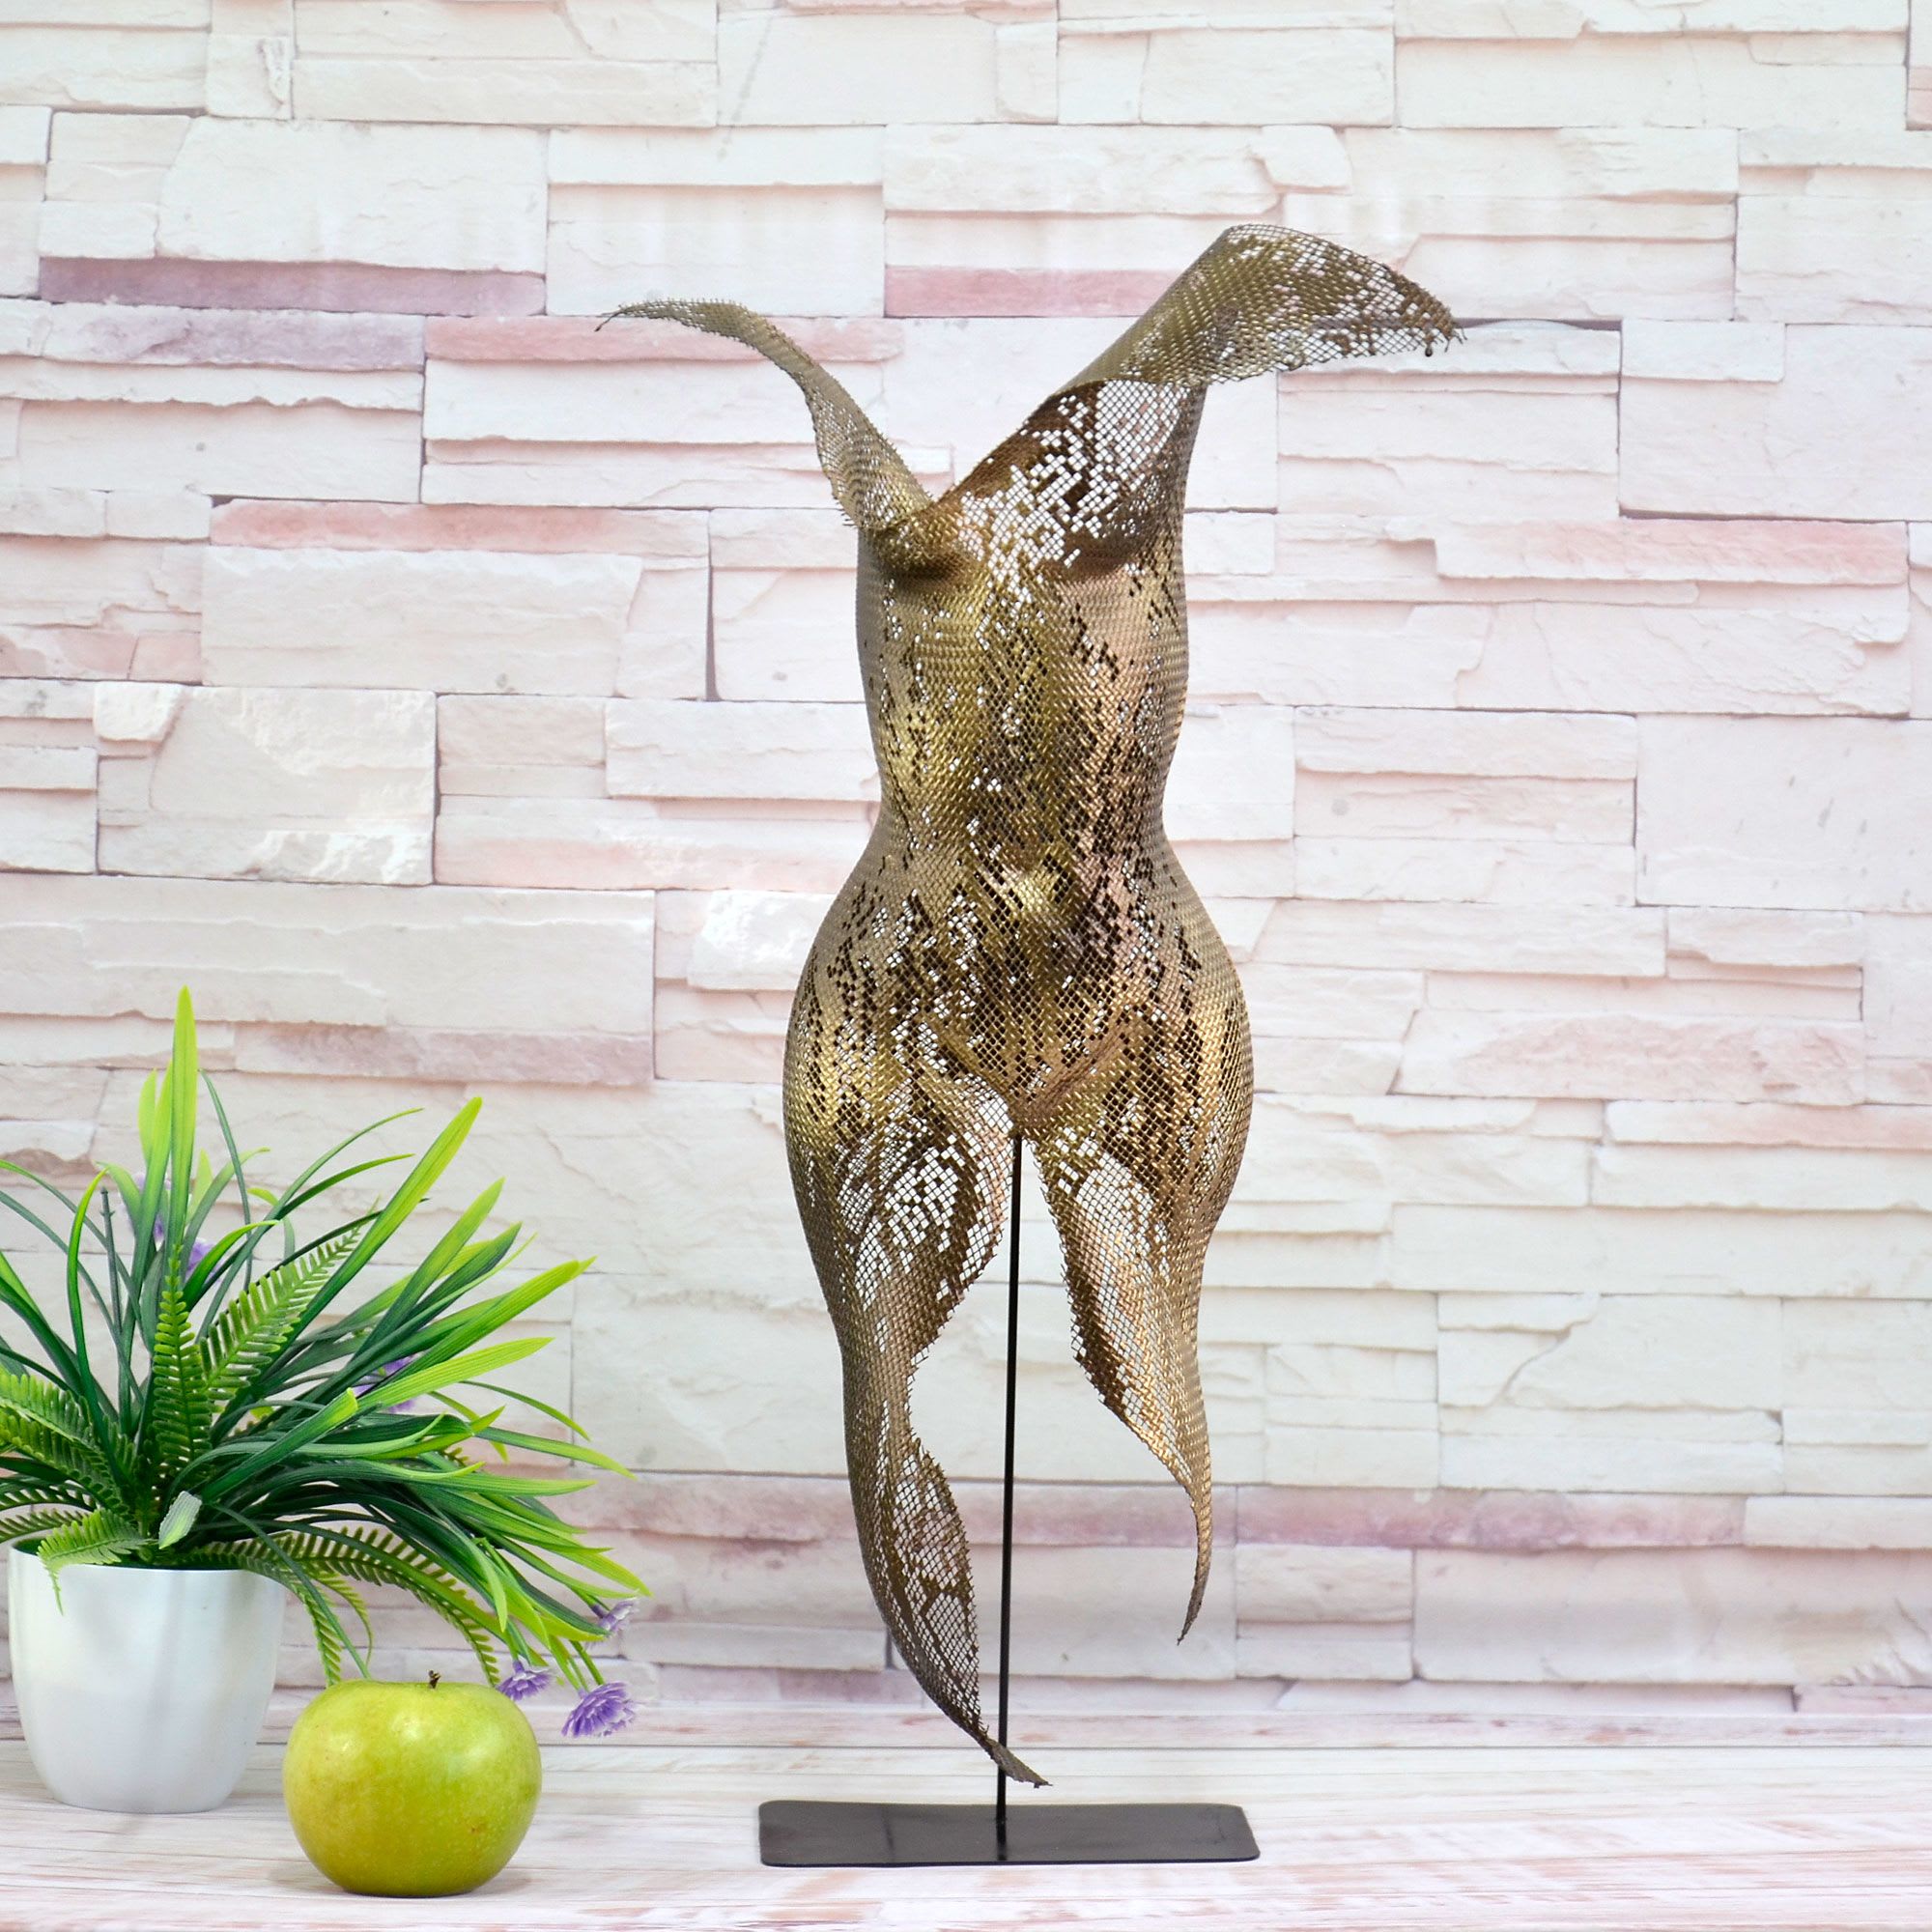 Handmade Torso Sculpture Ceramic Corset Female Bust Clay Wall Artlarge  Woman Model Statue Stainless Steel Hang Home Decoration -  Canada